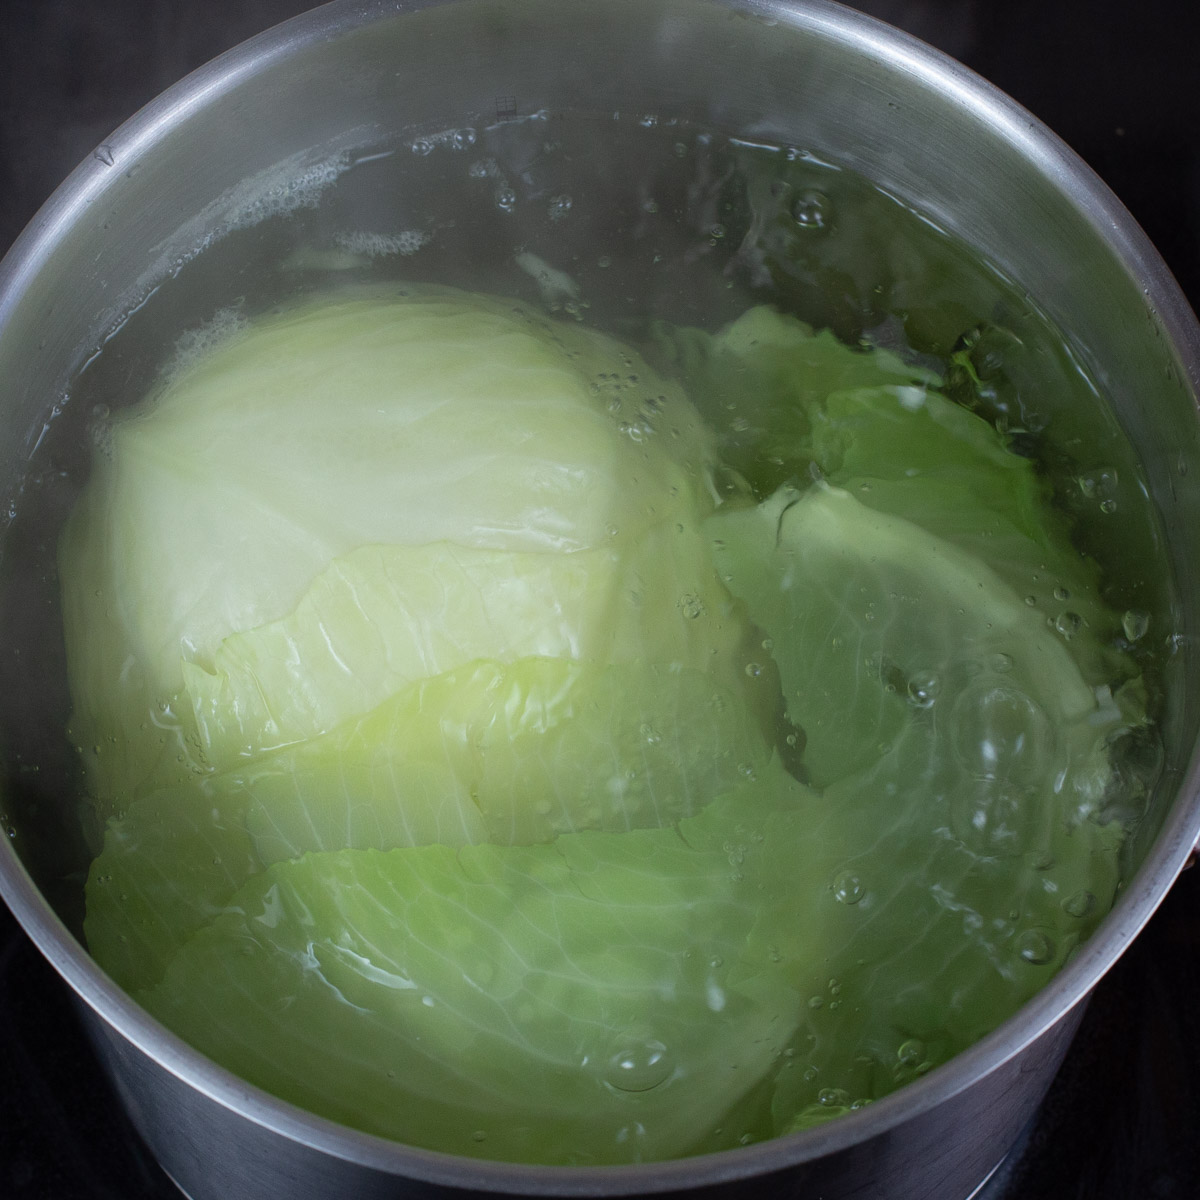 Whole cabbage boiling in stainless steel pot.